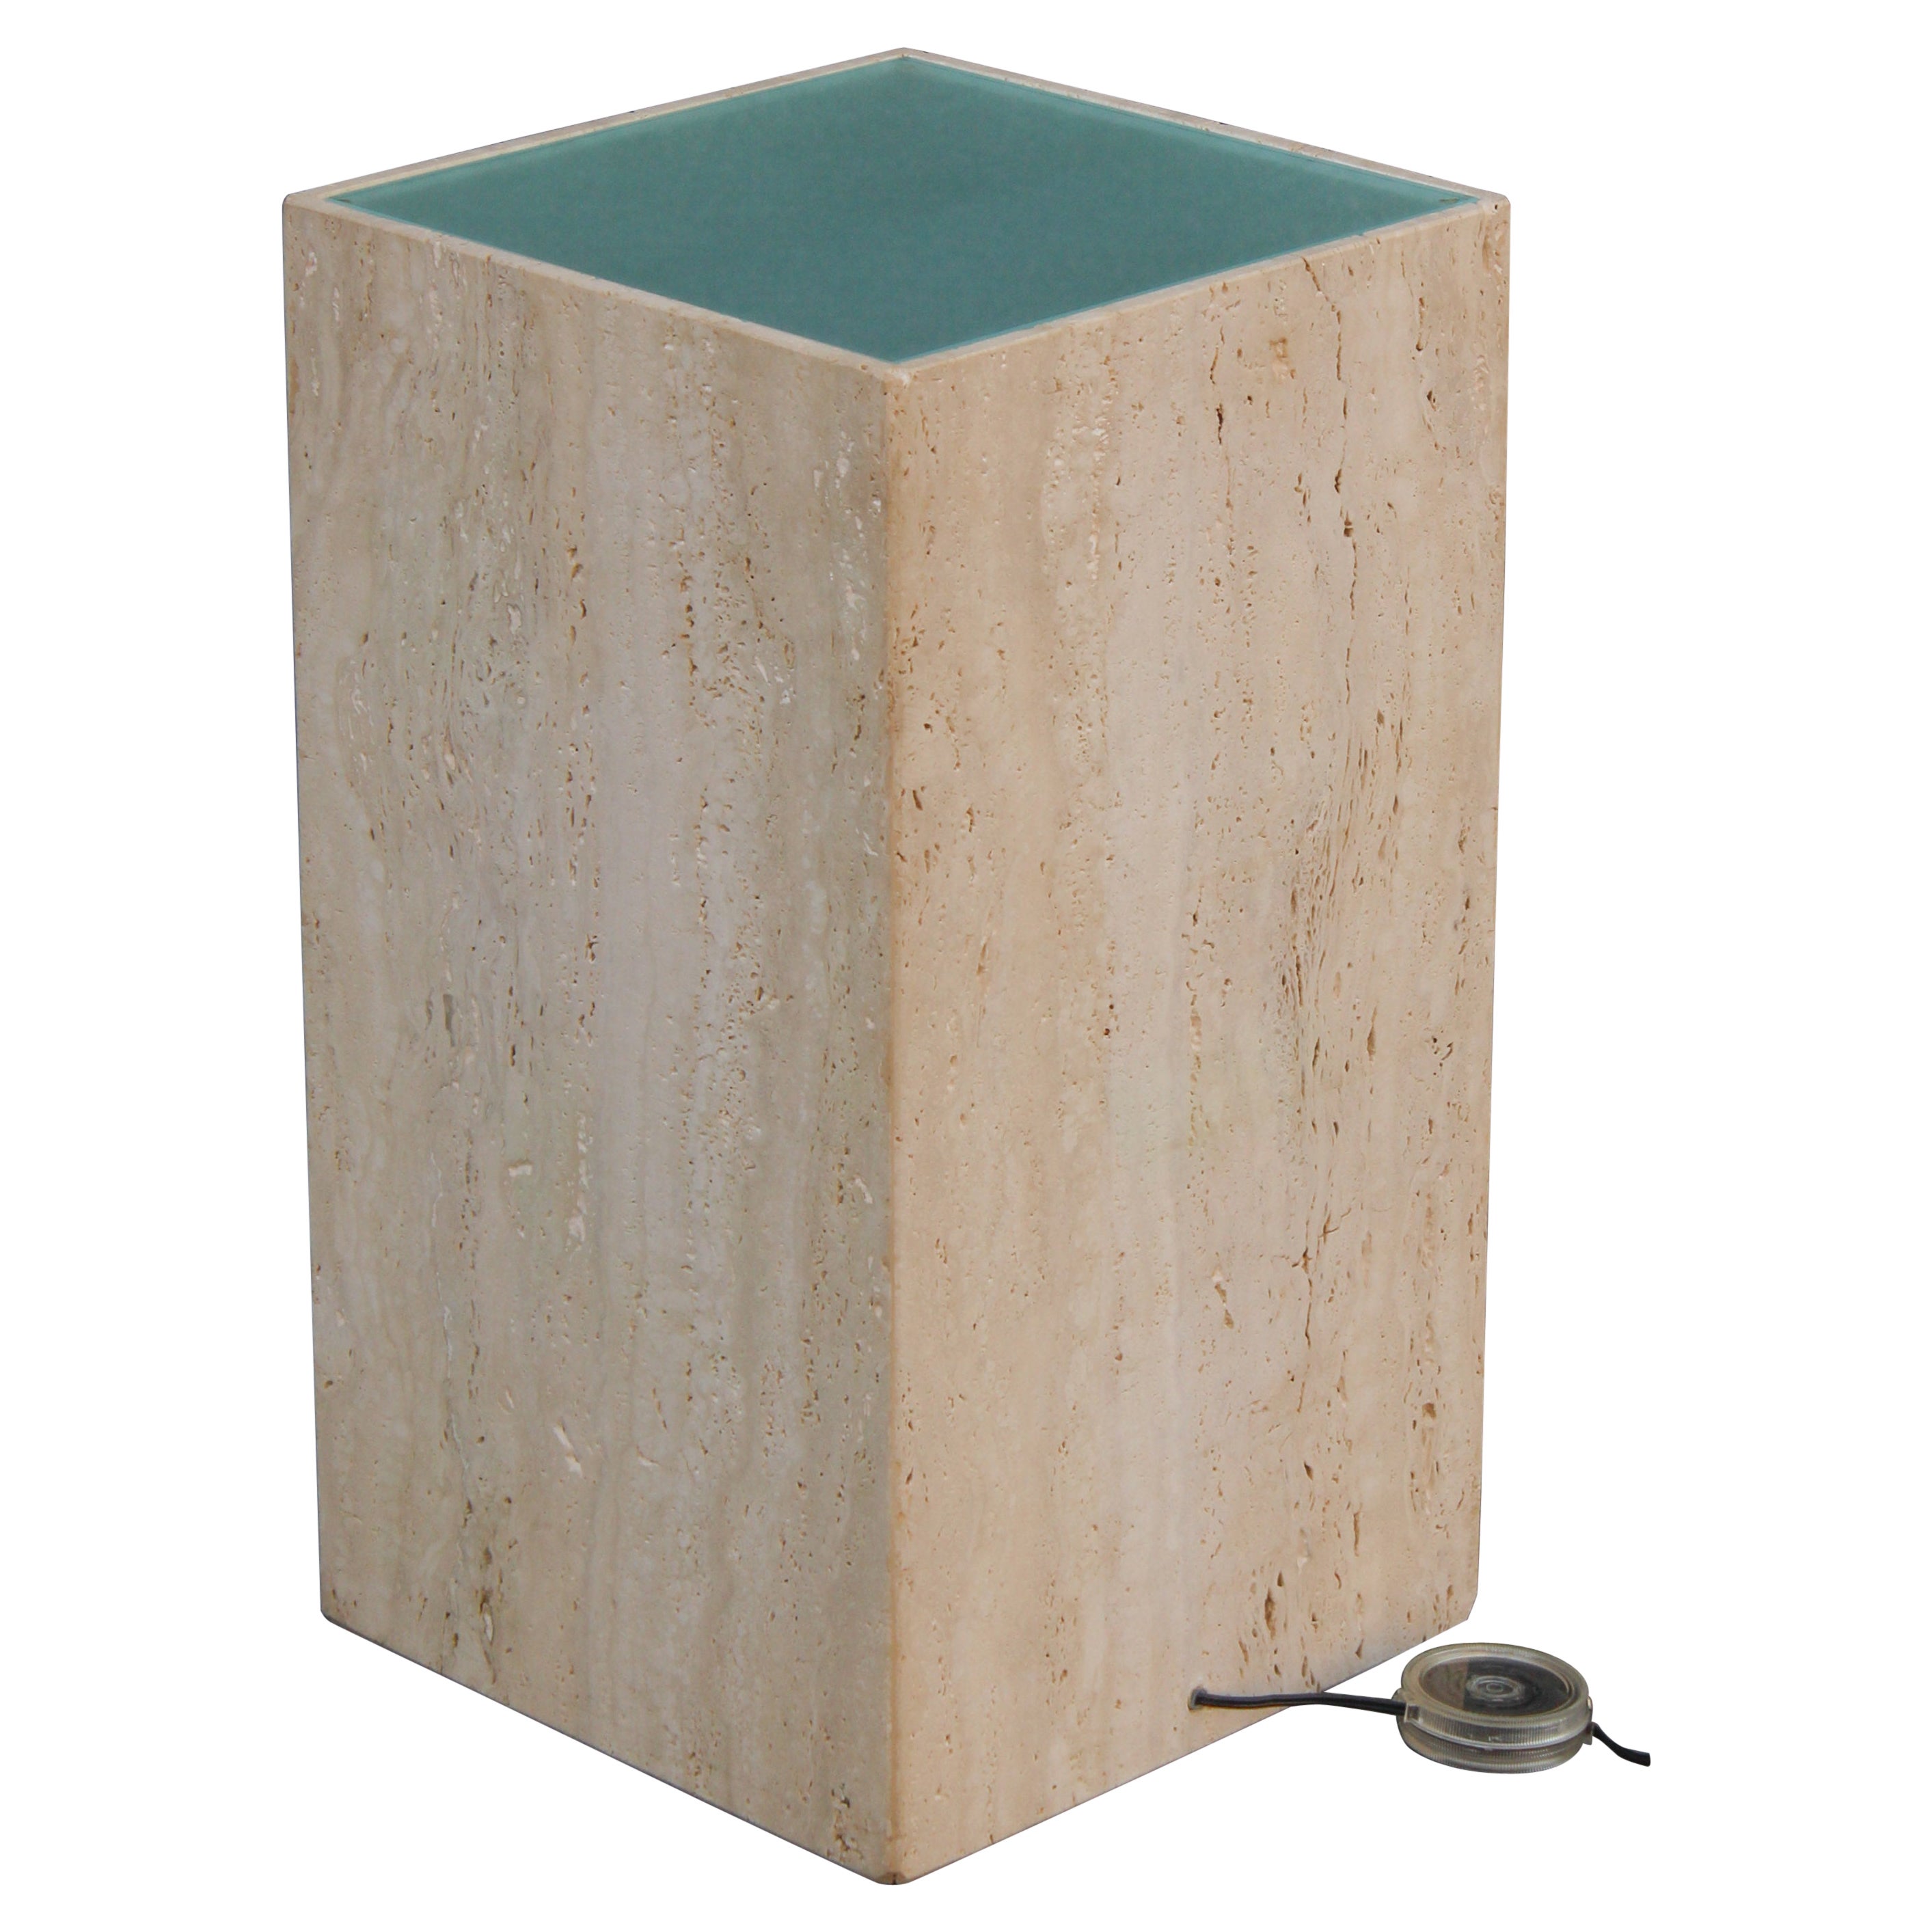 Post-Modern Italian Travertine Marble Frosted Glass Illuminated Pedestal For Sale